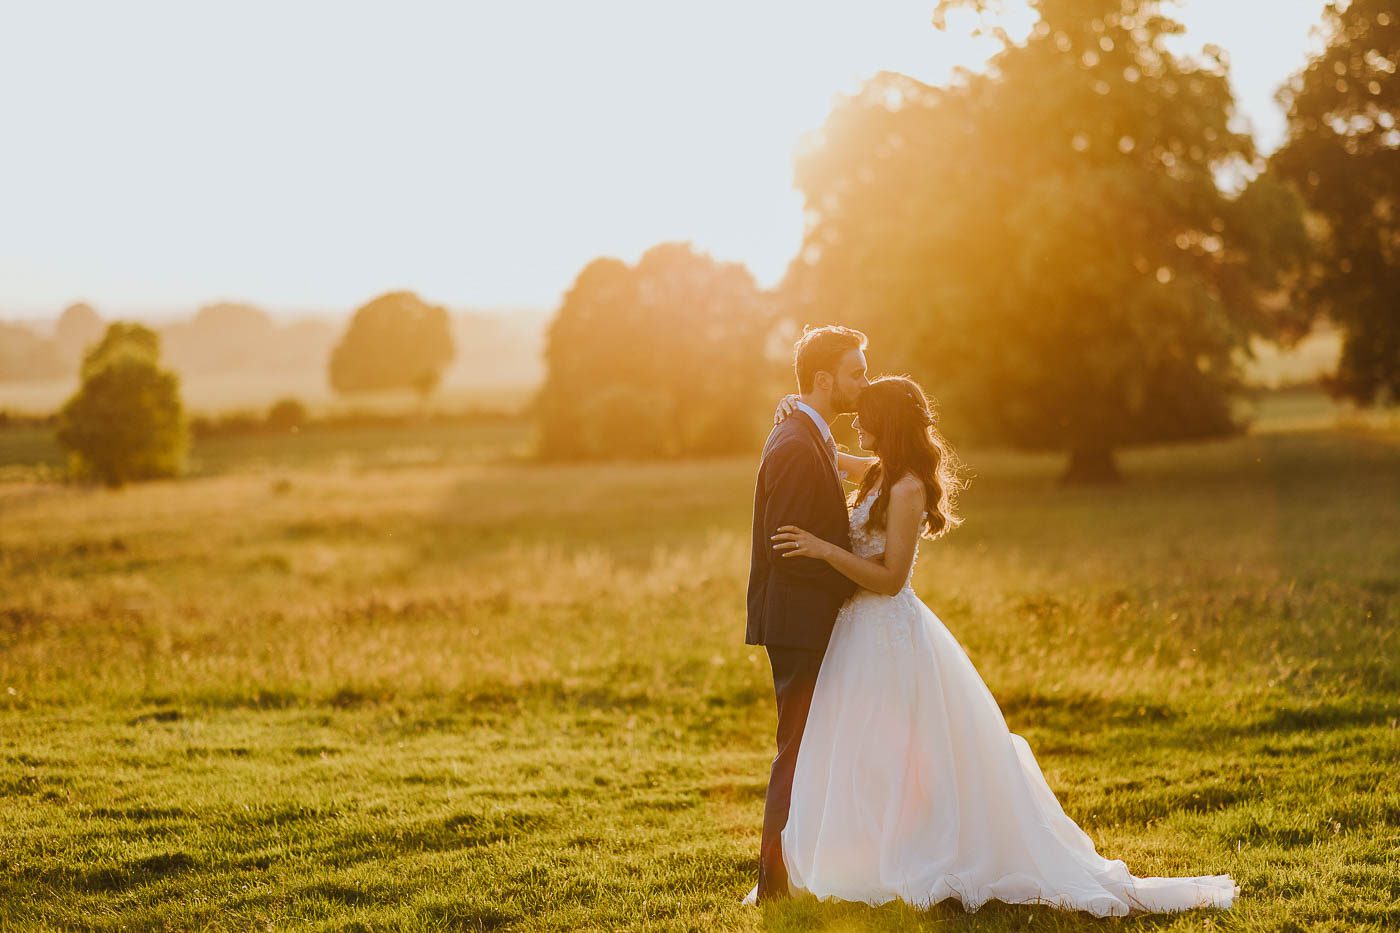 newby hall wedding photos | romantic photo of bride and groom during golden hour in the countryside at newby hall in north yorkshire. stately home wedding near harrogate